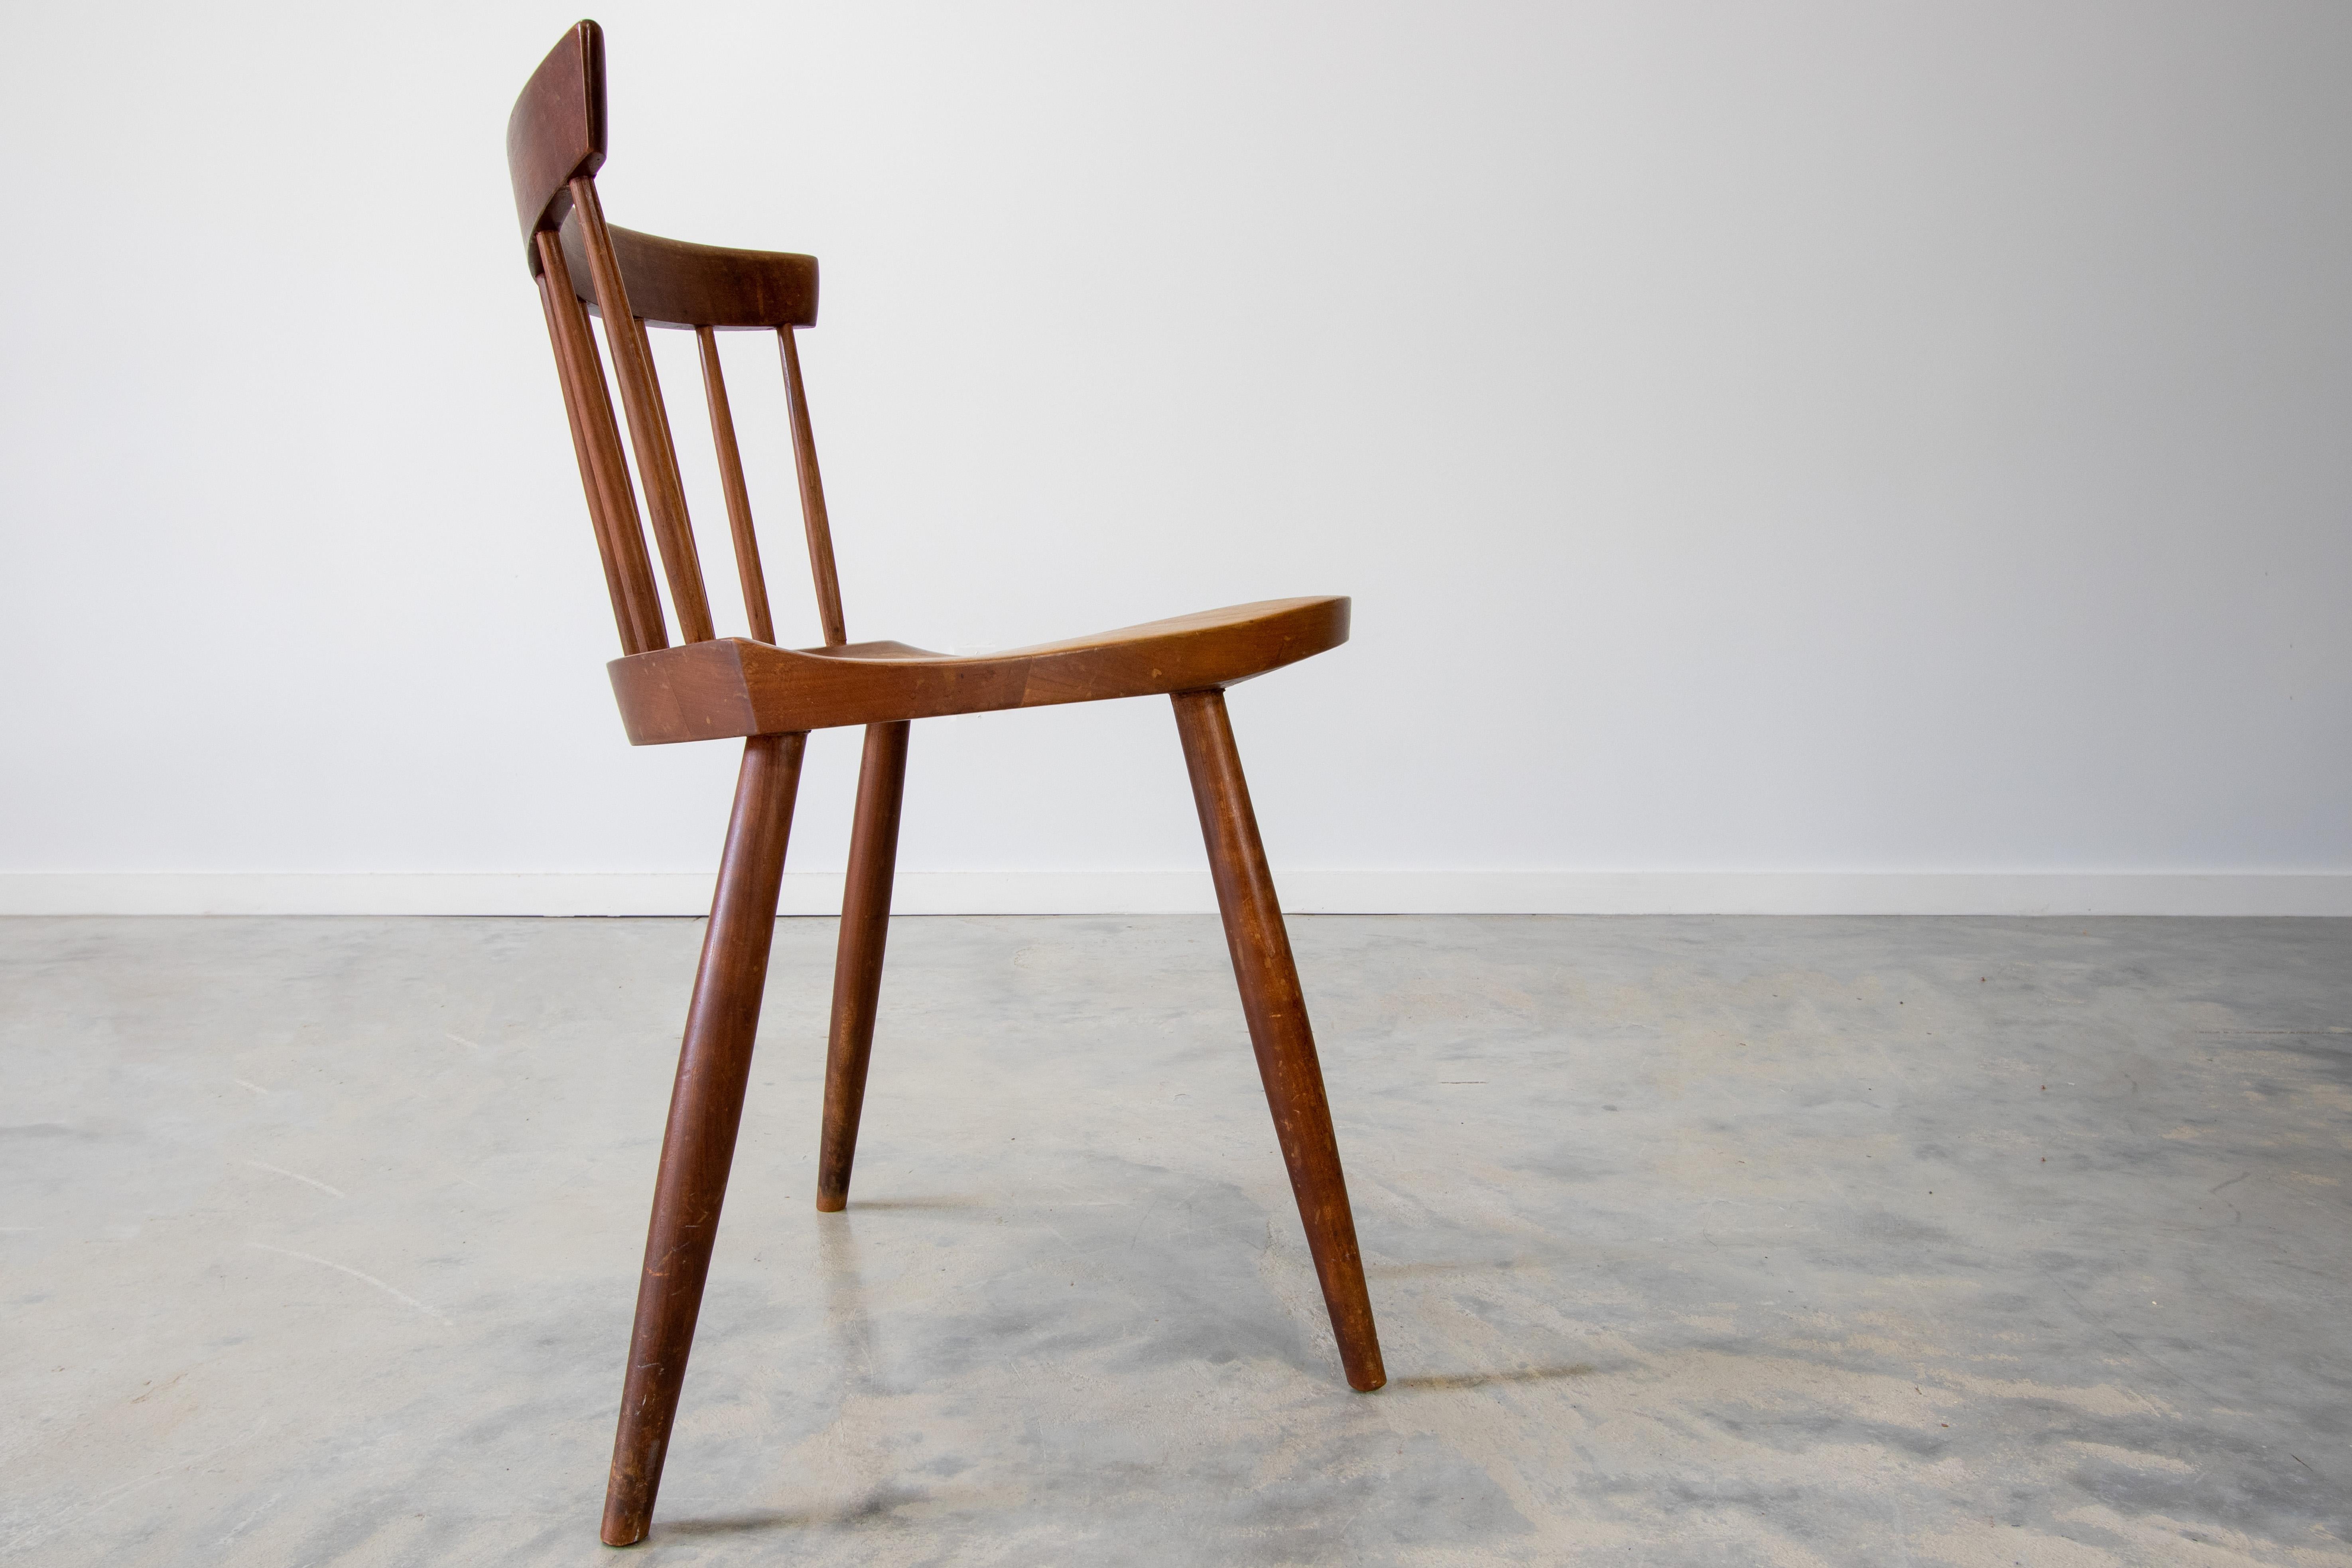 A solid cherry Mira chair in the manner of George Nakashima Studios. This chair came from a NJ estate loaded with Nakashima pieces. This one stood out to us, as the Mira side Chair designed by George Nakashima was never offered with four legs.